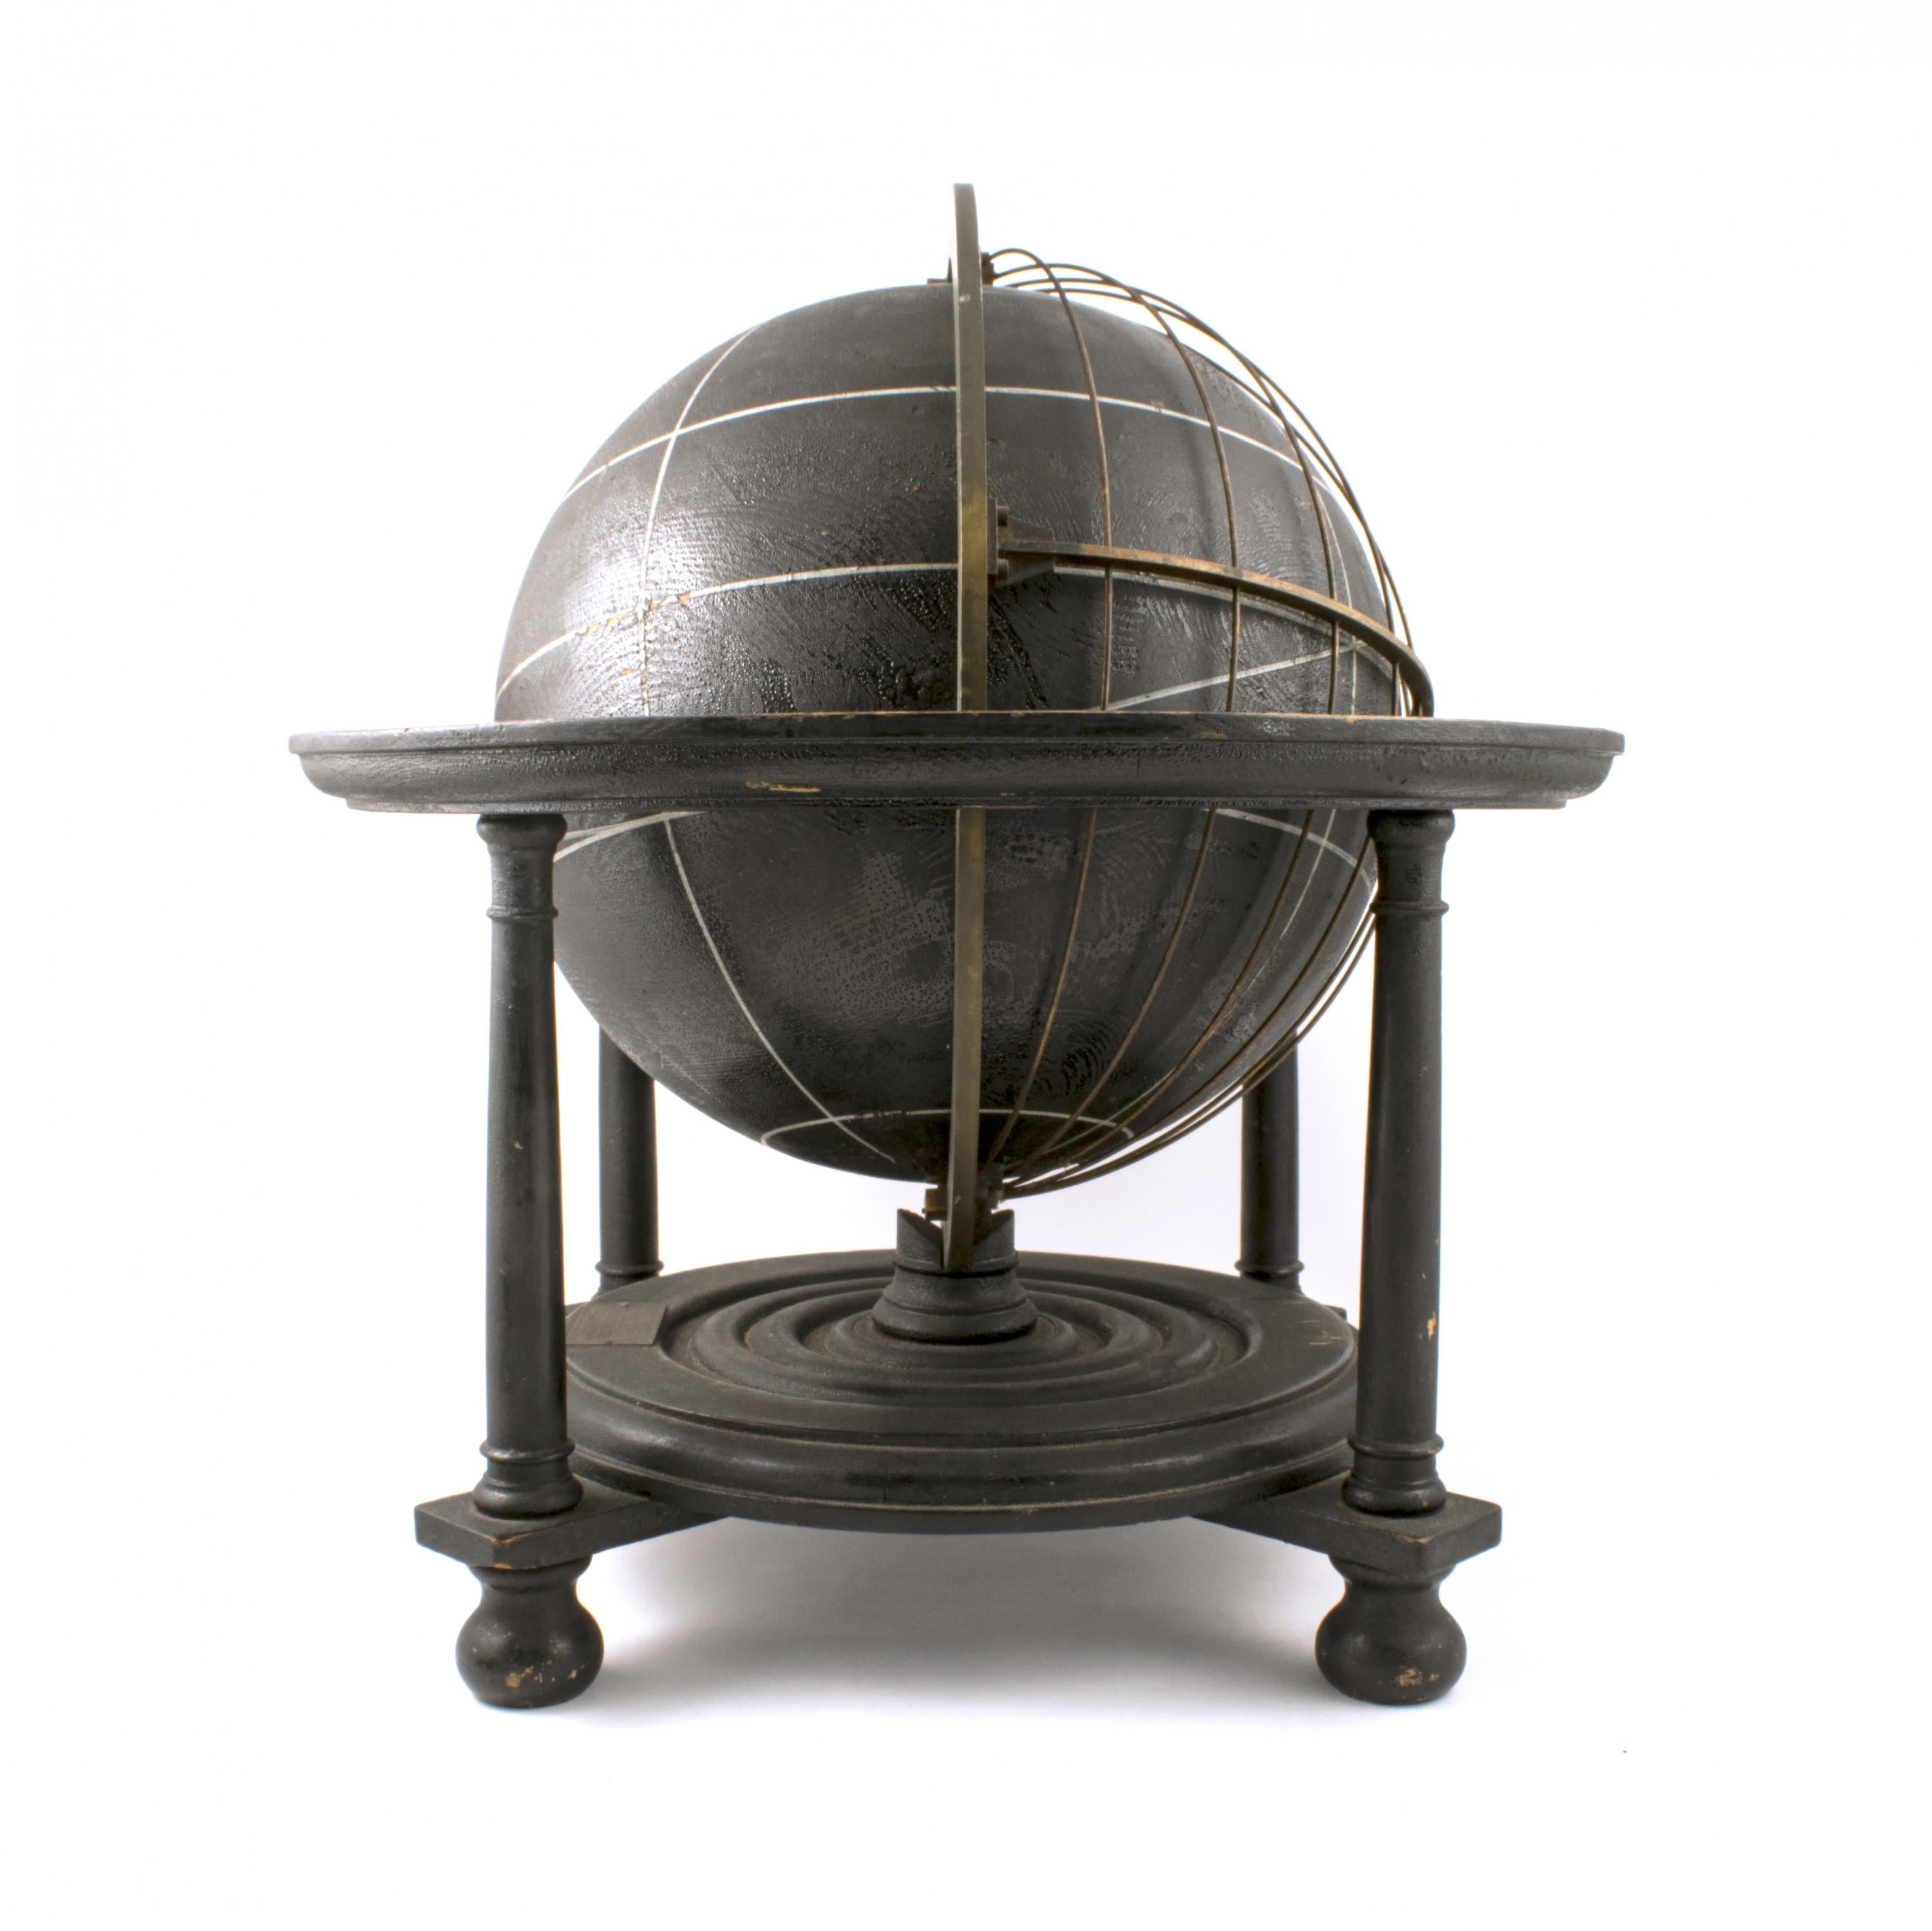 Black wooden celestial globe in original condition.
Blackened wood, horizon circle and brass rings with longitude measurements.
Mounted on wooden stand with turned legs and bun feet.
A very decorative globe with natural age-related